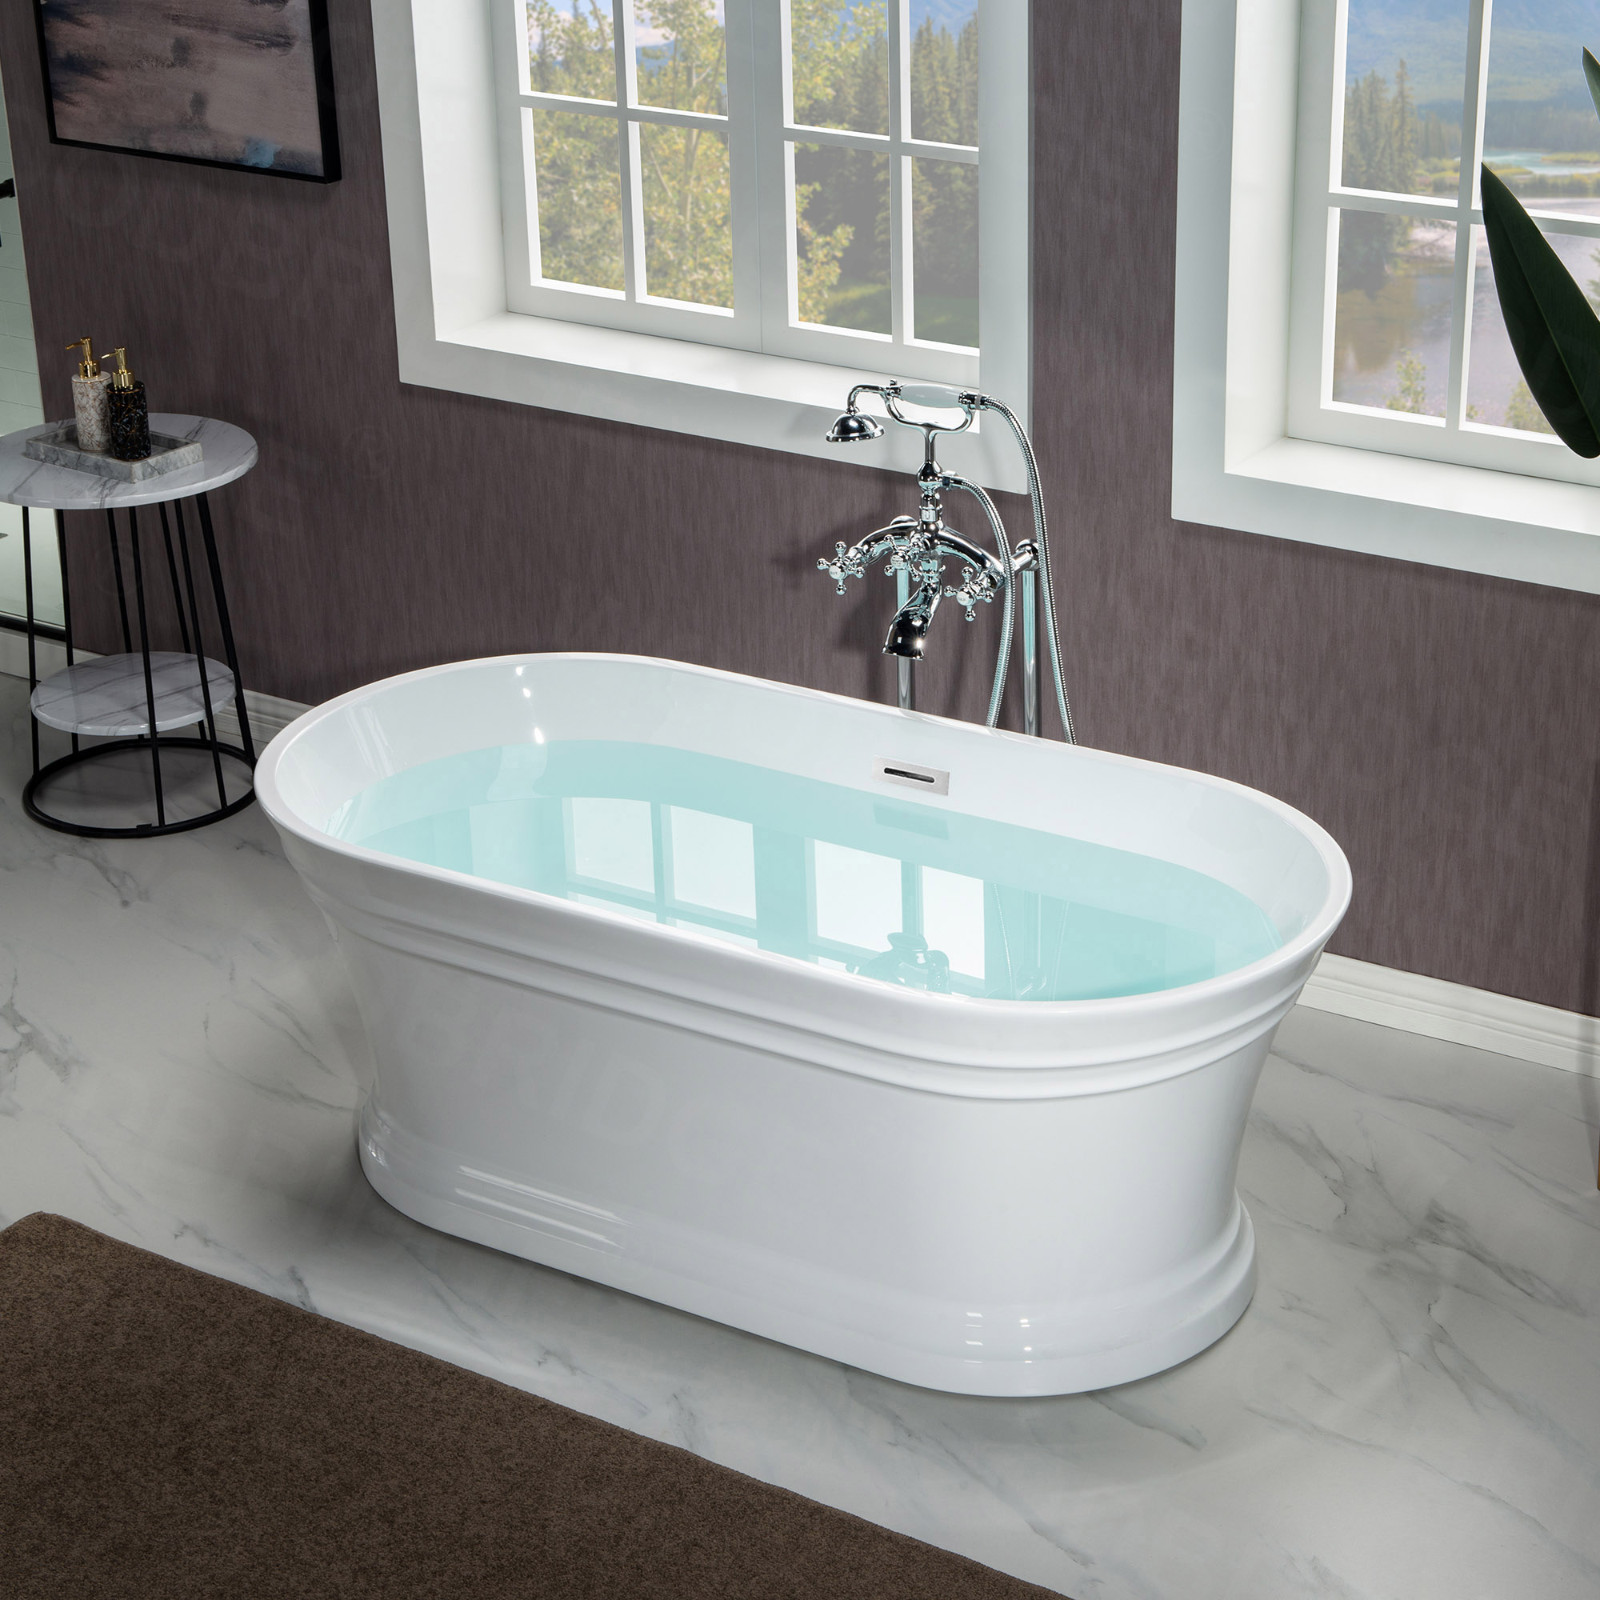  WOODBRIDGE 67 in. Freestanding Double Ended Acrylic Soaking Bathtub with Center Drain Assembly and Overflow, BTA1537/B1537, Glossy White_7736